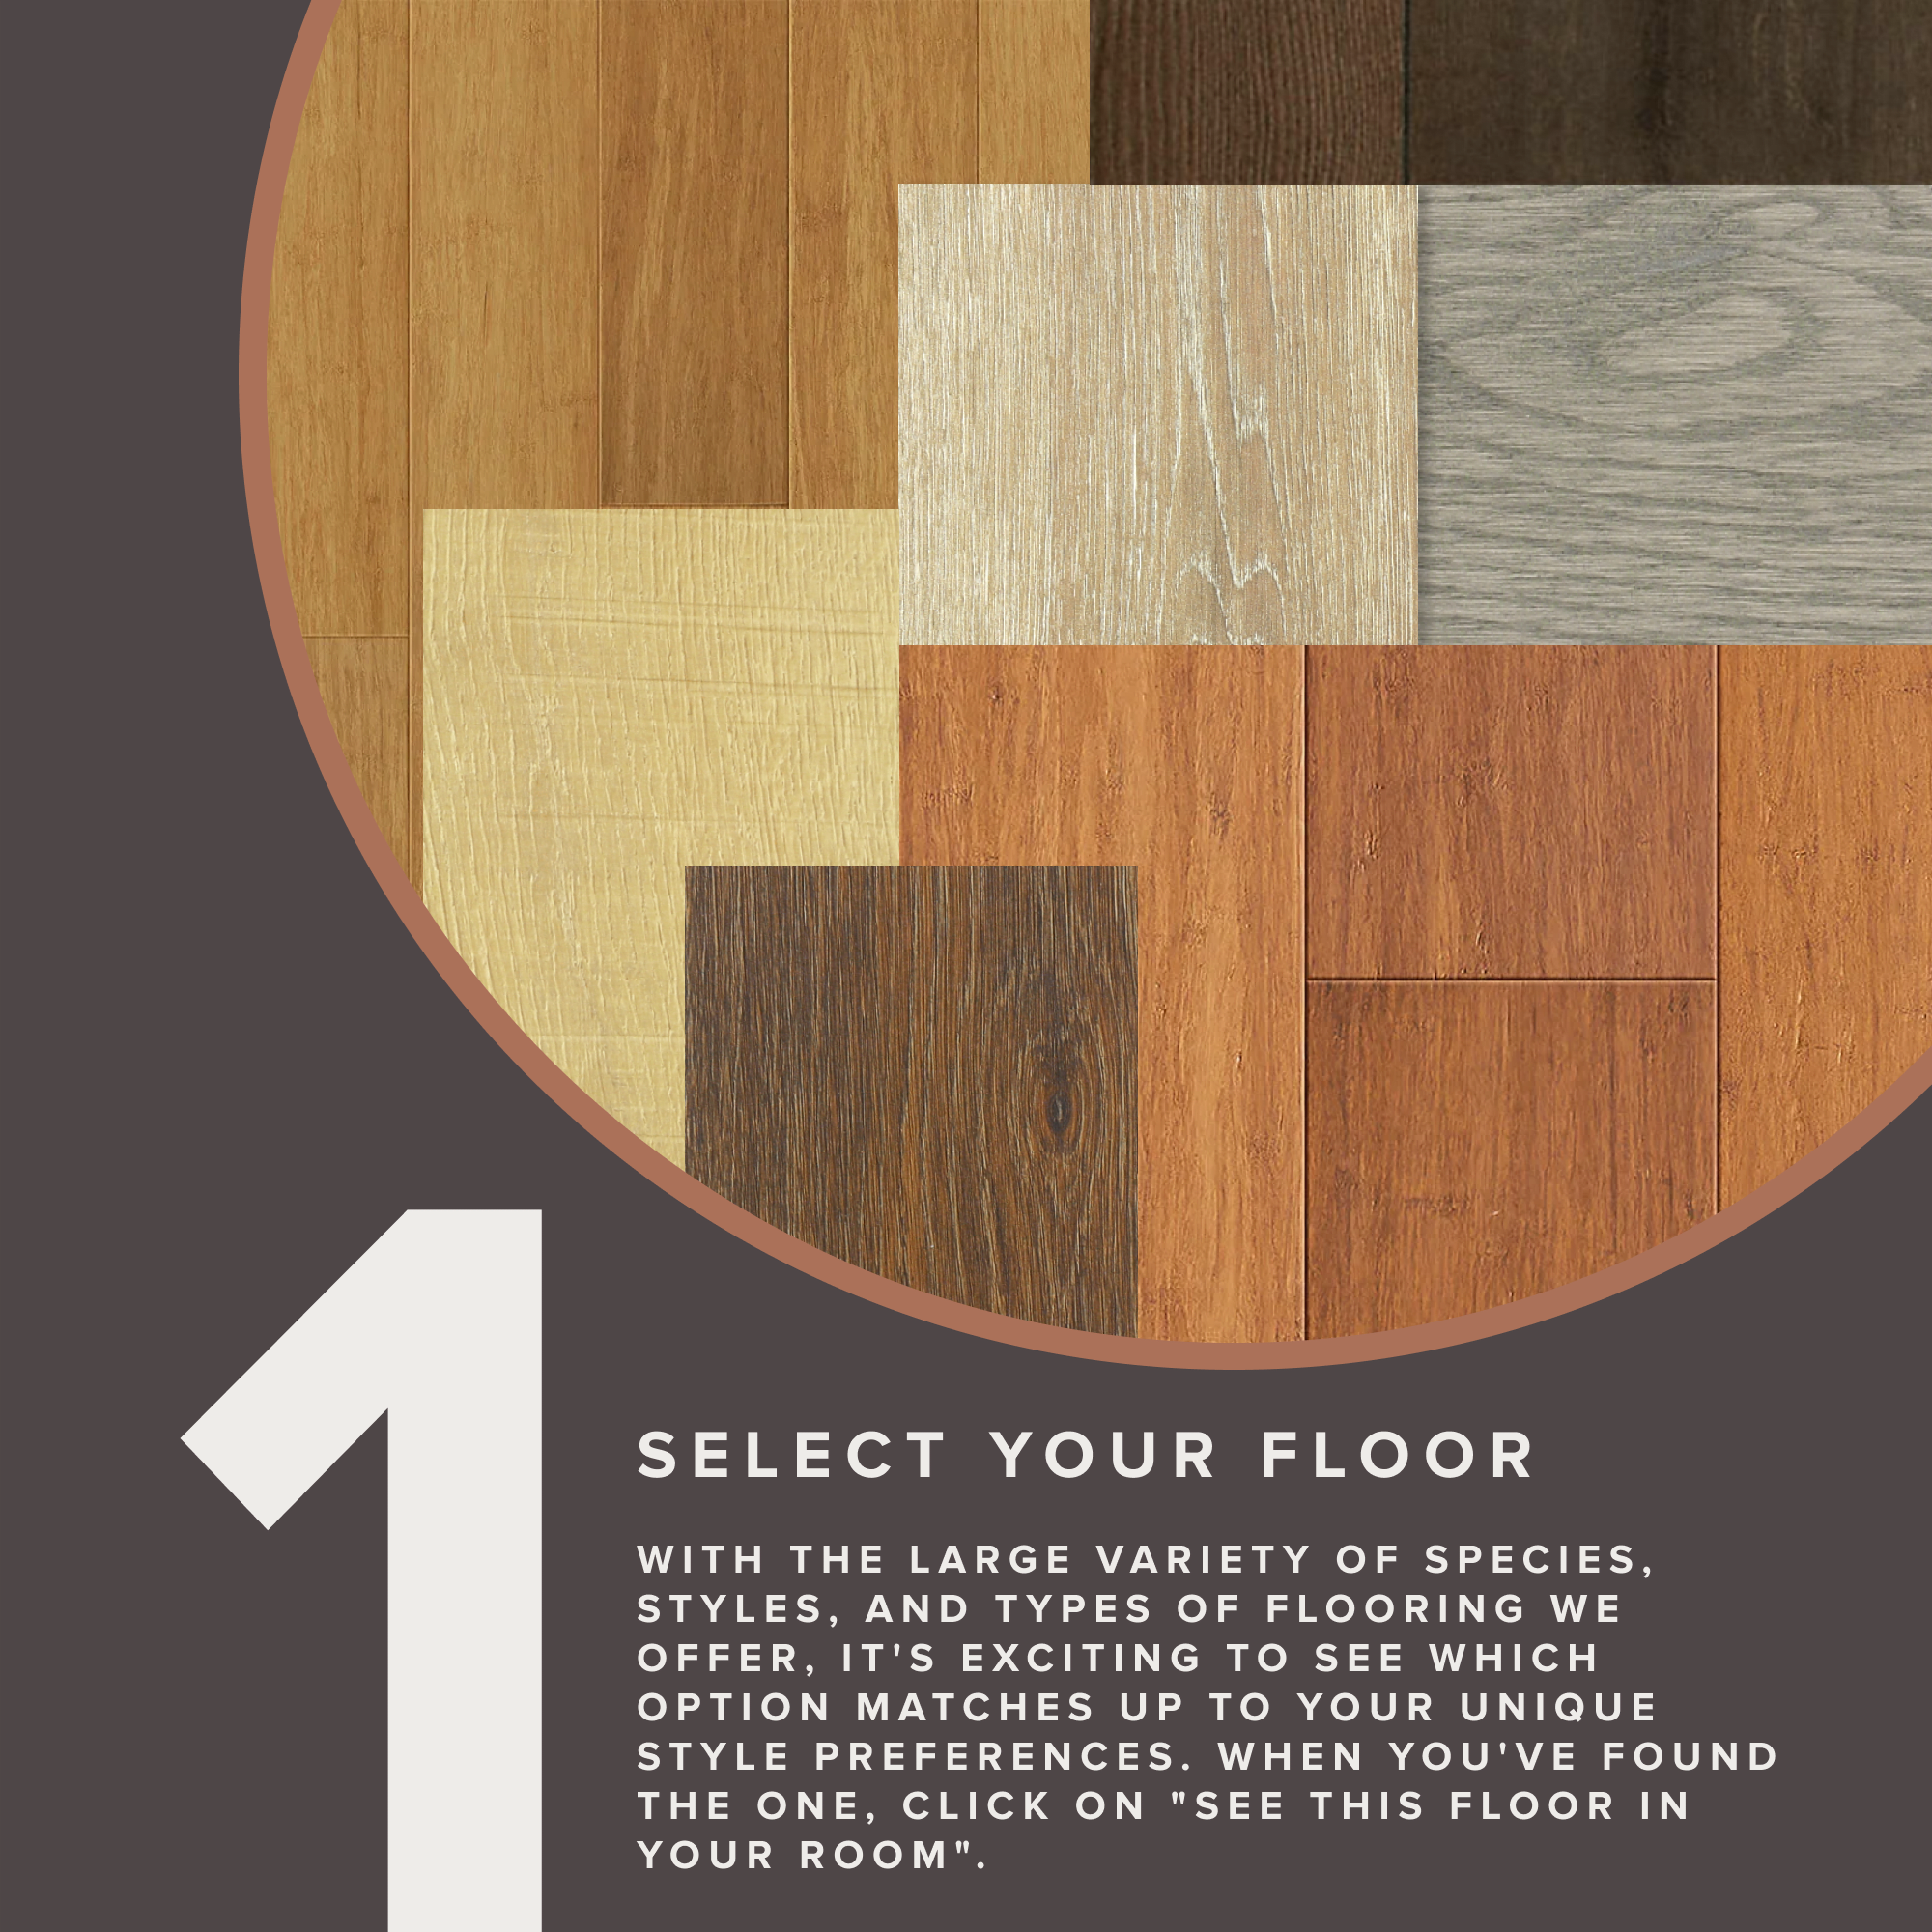 Selecting Luxury Vinyl Plank: Tips for Your Design